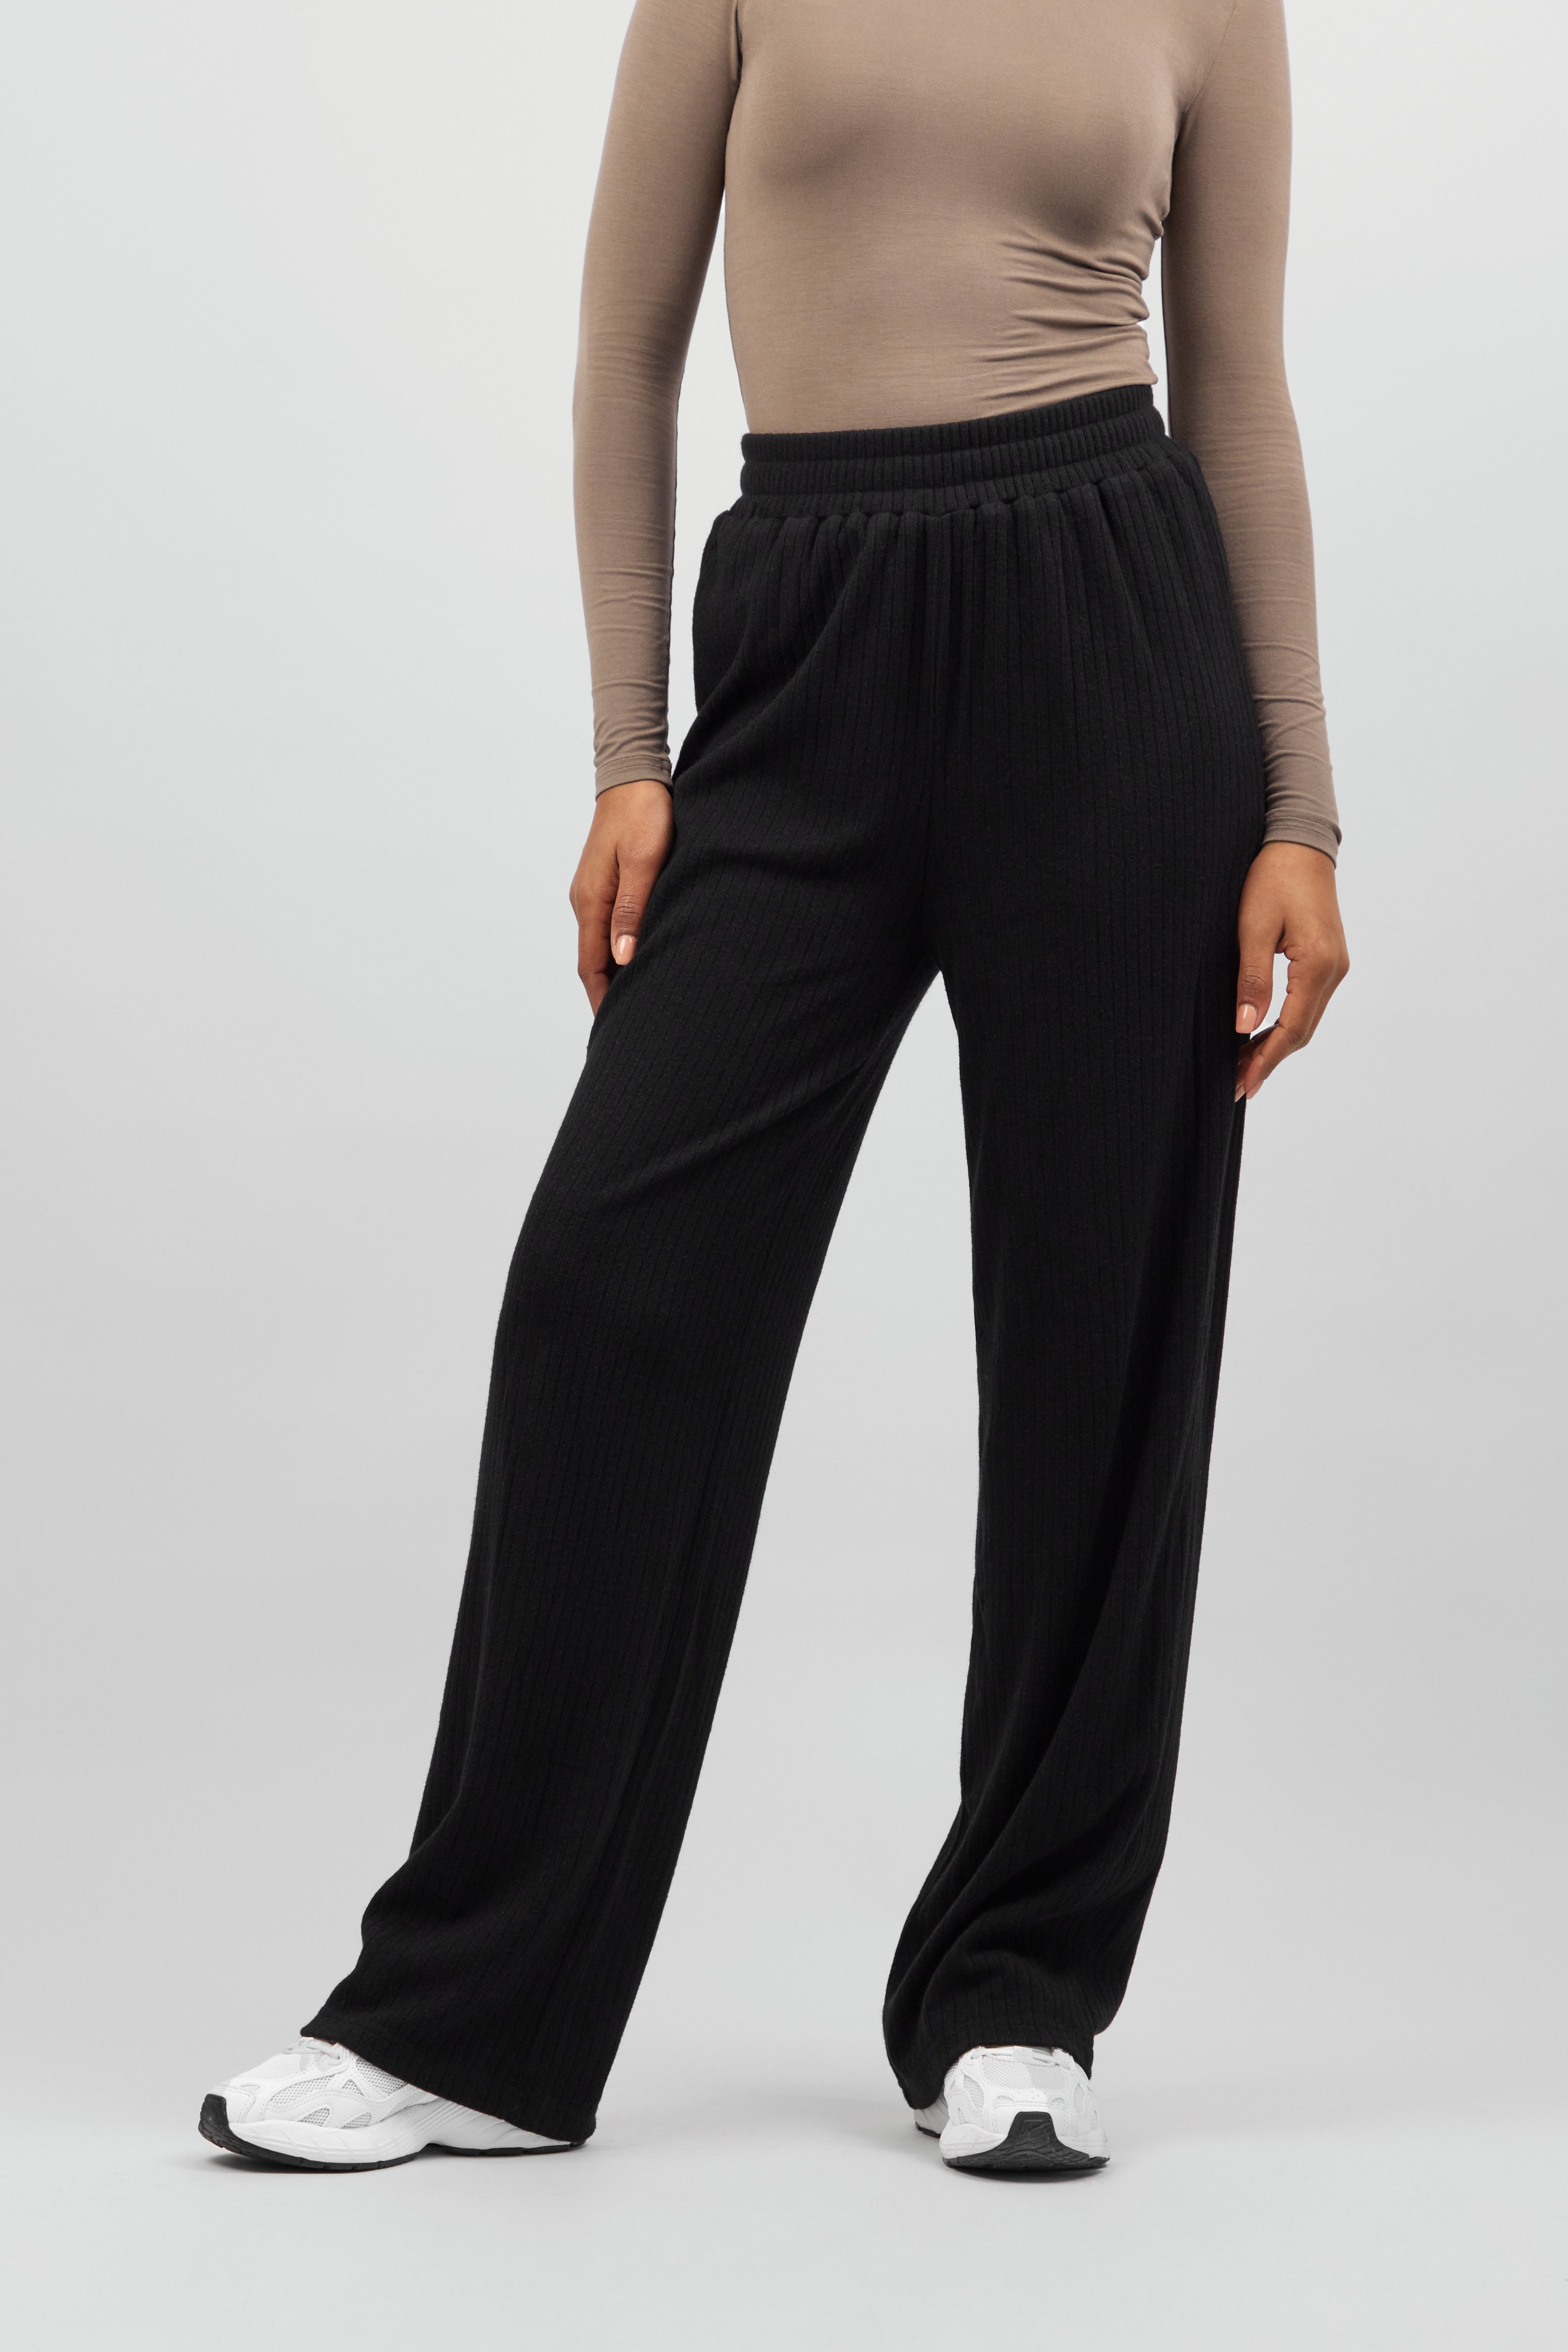 CA - Knit Relaxed Fit Pants - Black